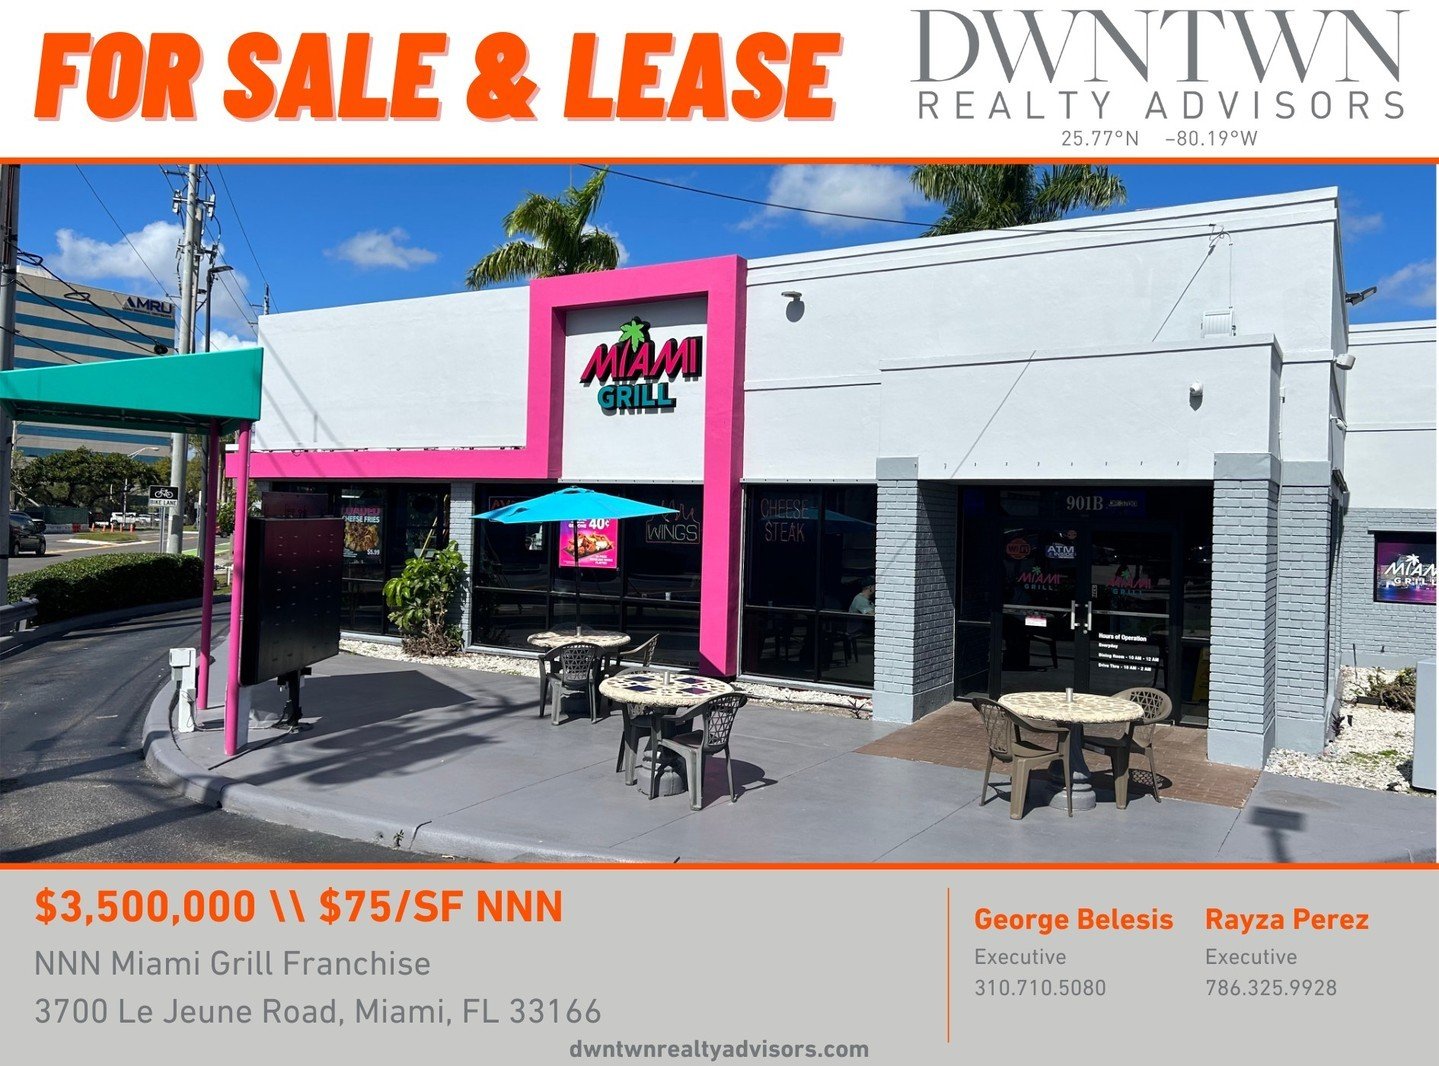 JUST LISTED FOR SALE &amp; LEASE | NNN Miami Grill Franchise

DWNTWN Realty Advisors has been retained exclusively by ownership to arrange the sale and lease of 3700 Le Jeune Road, Miami FL. The subject property is a NNN leased investment property, l